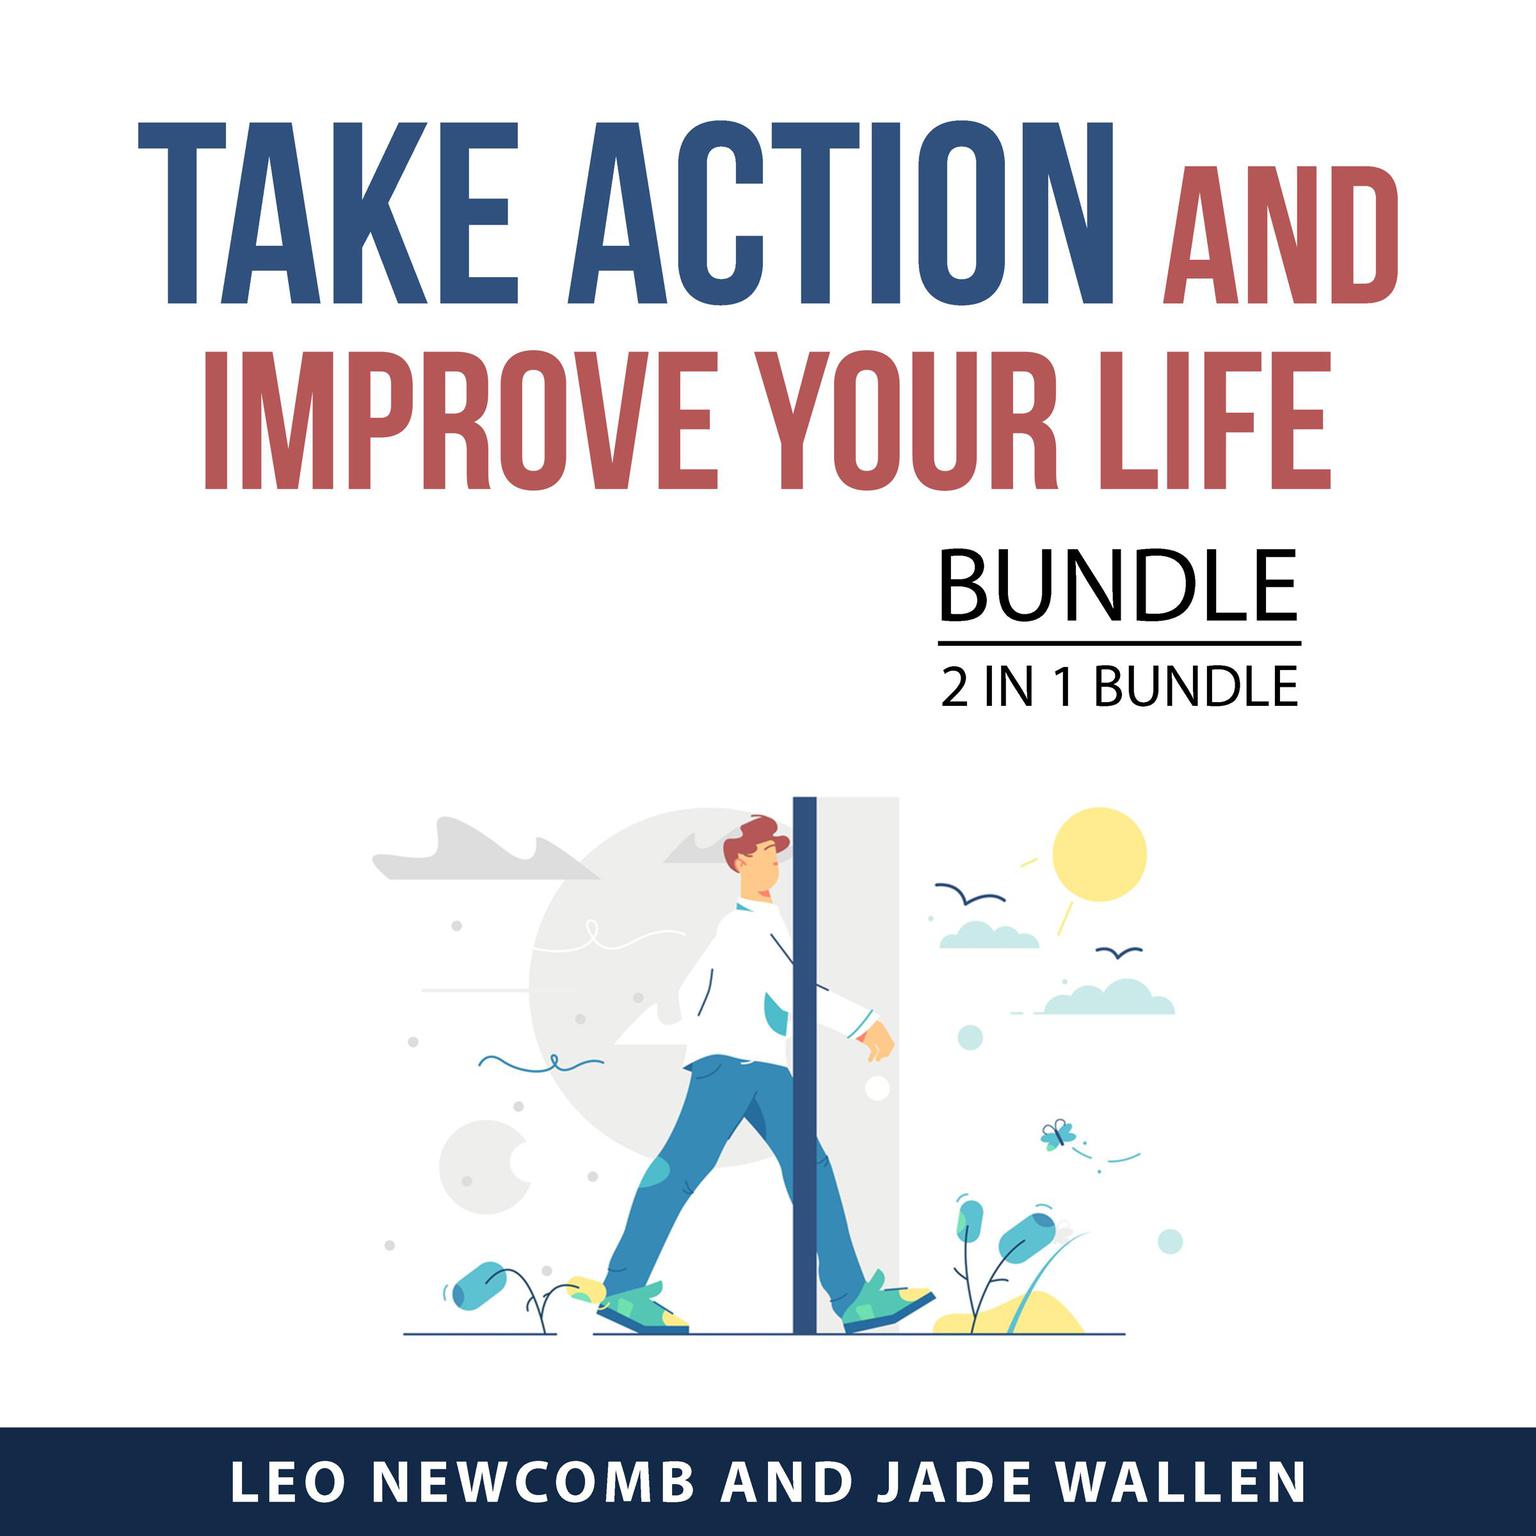 Take Action and Improve Your Life Bundle, 2 in 1 Bundle Audiobook, by Jade Wallen